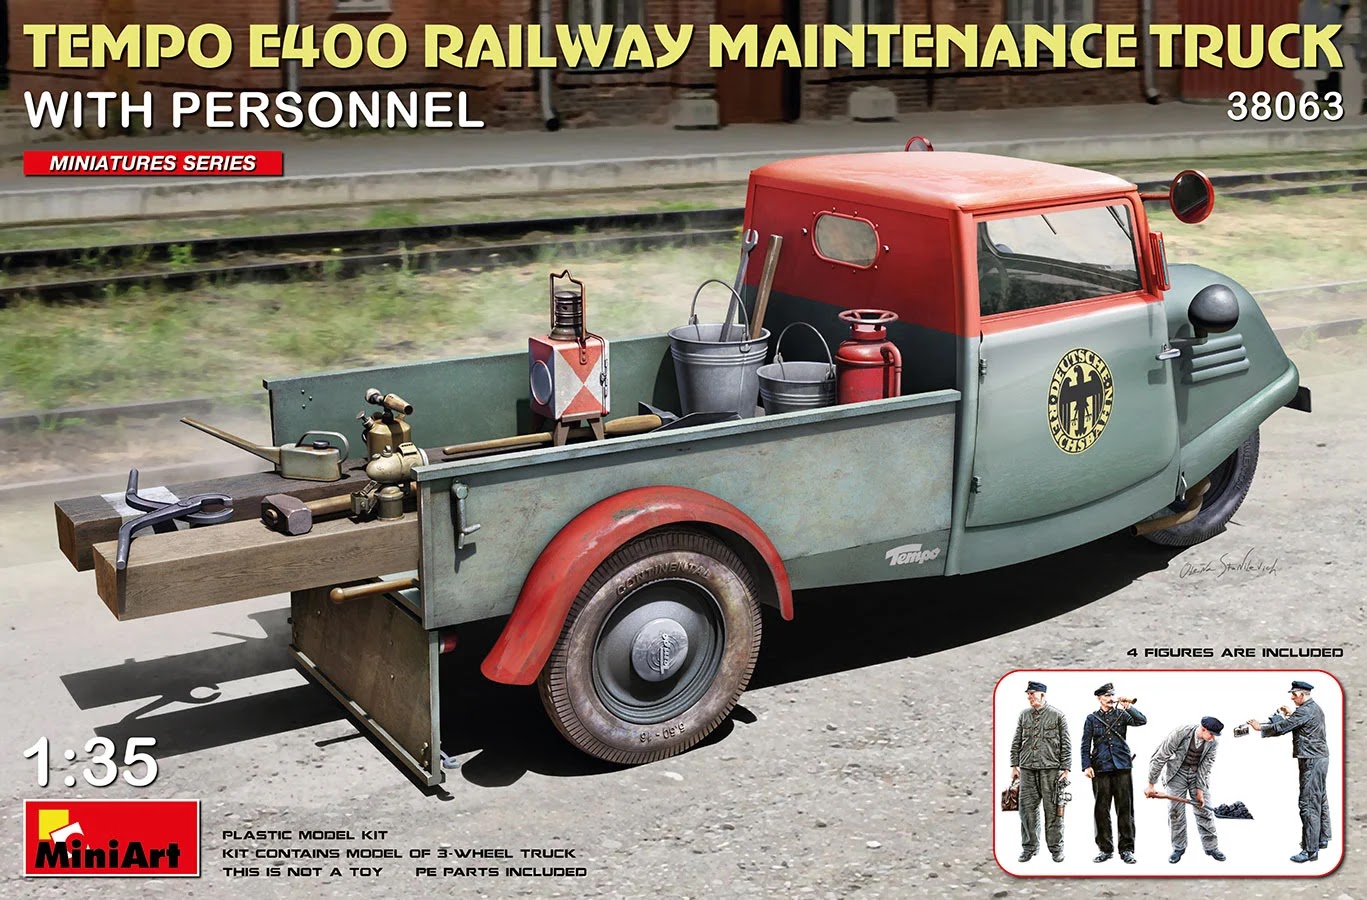 Preview: A Mini Mobile Workshop from MiniArt - Tempo E400 Railway Maintenance Truck w/Personnel